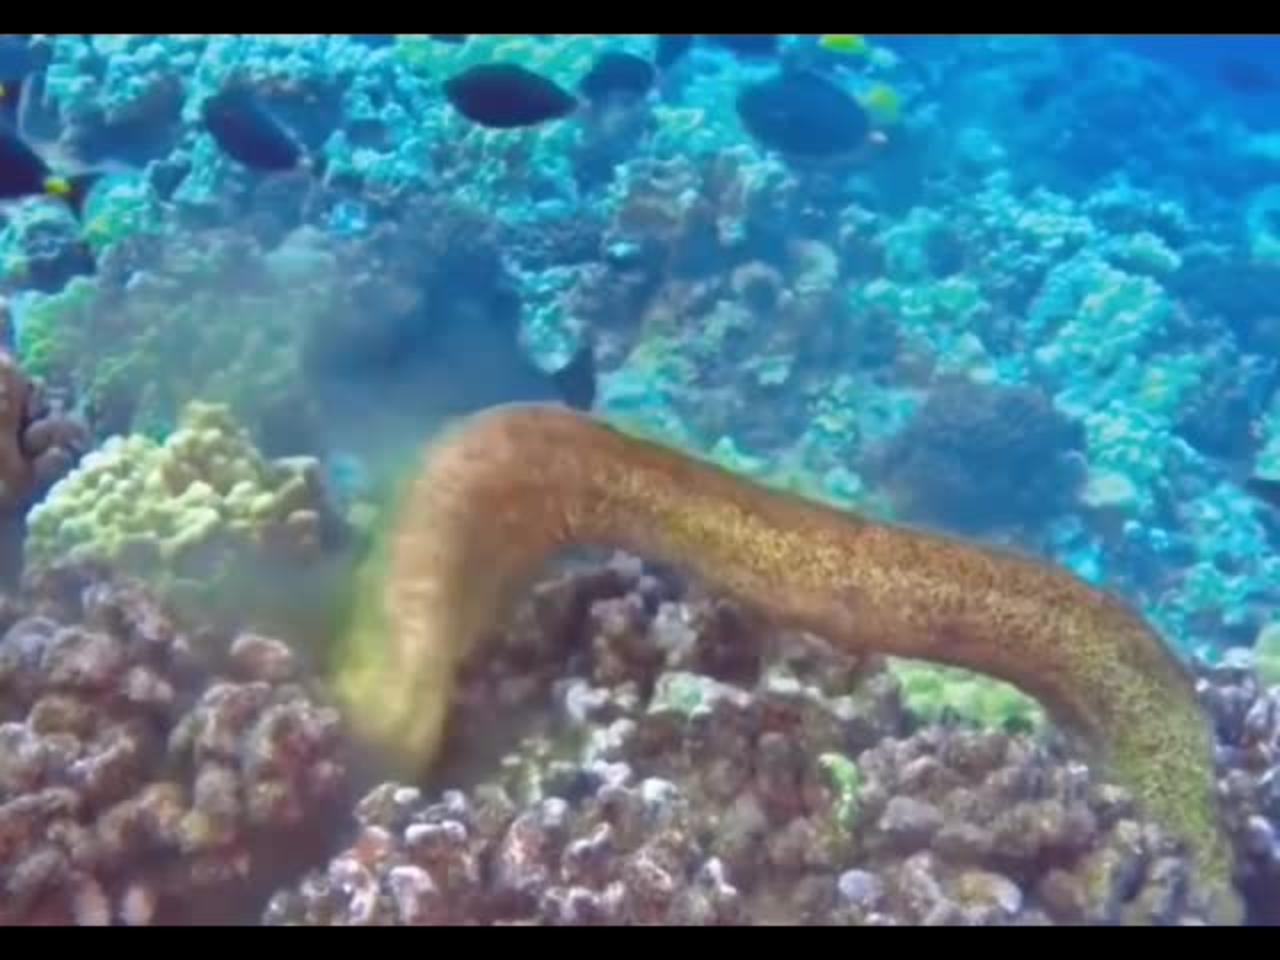 Is this a moray eel feeding on an octopus?